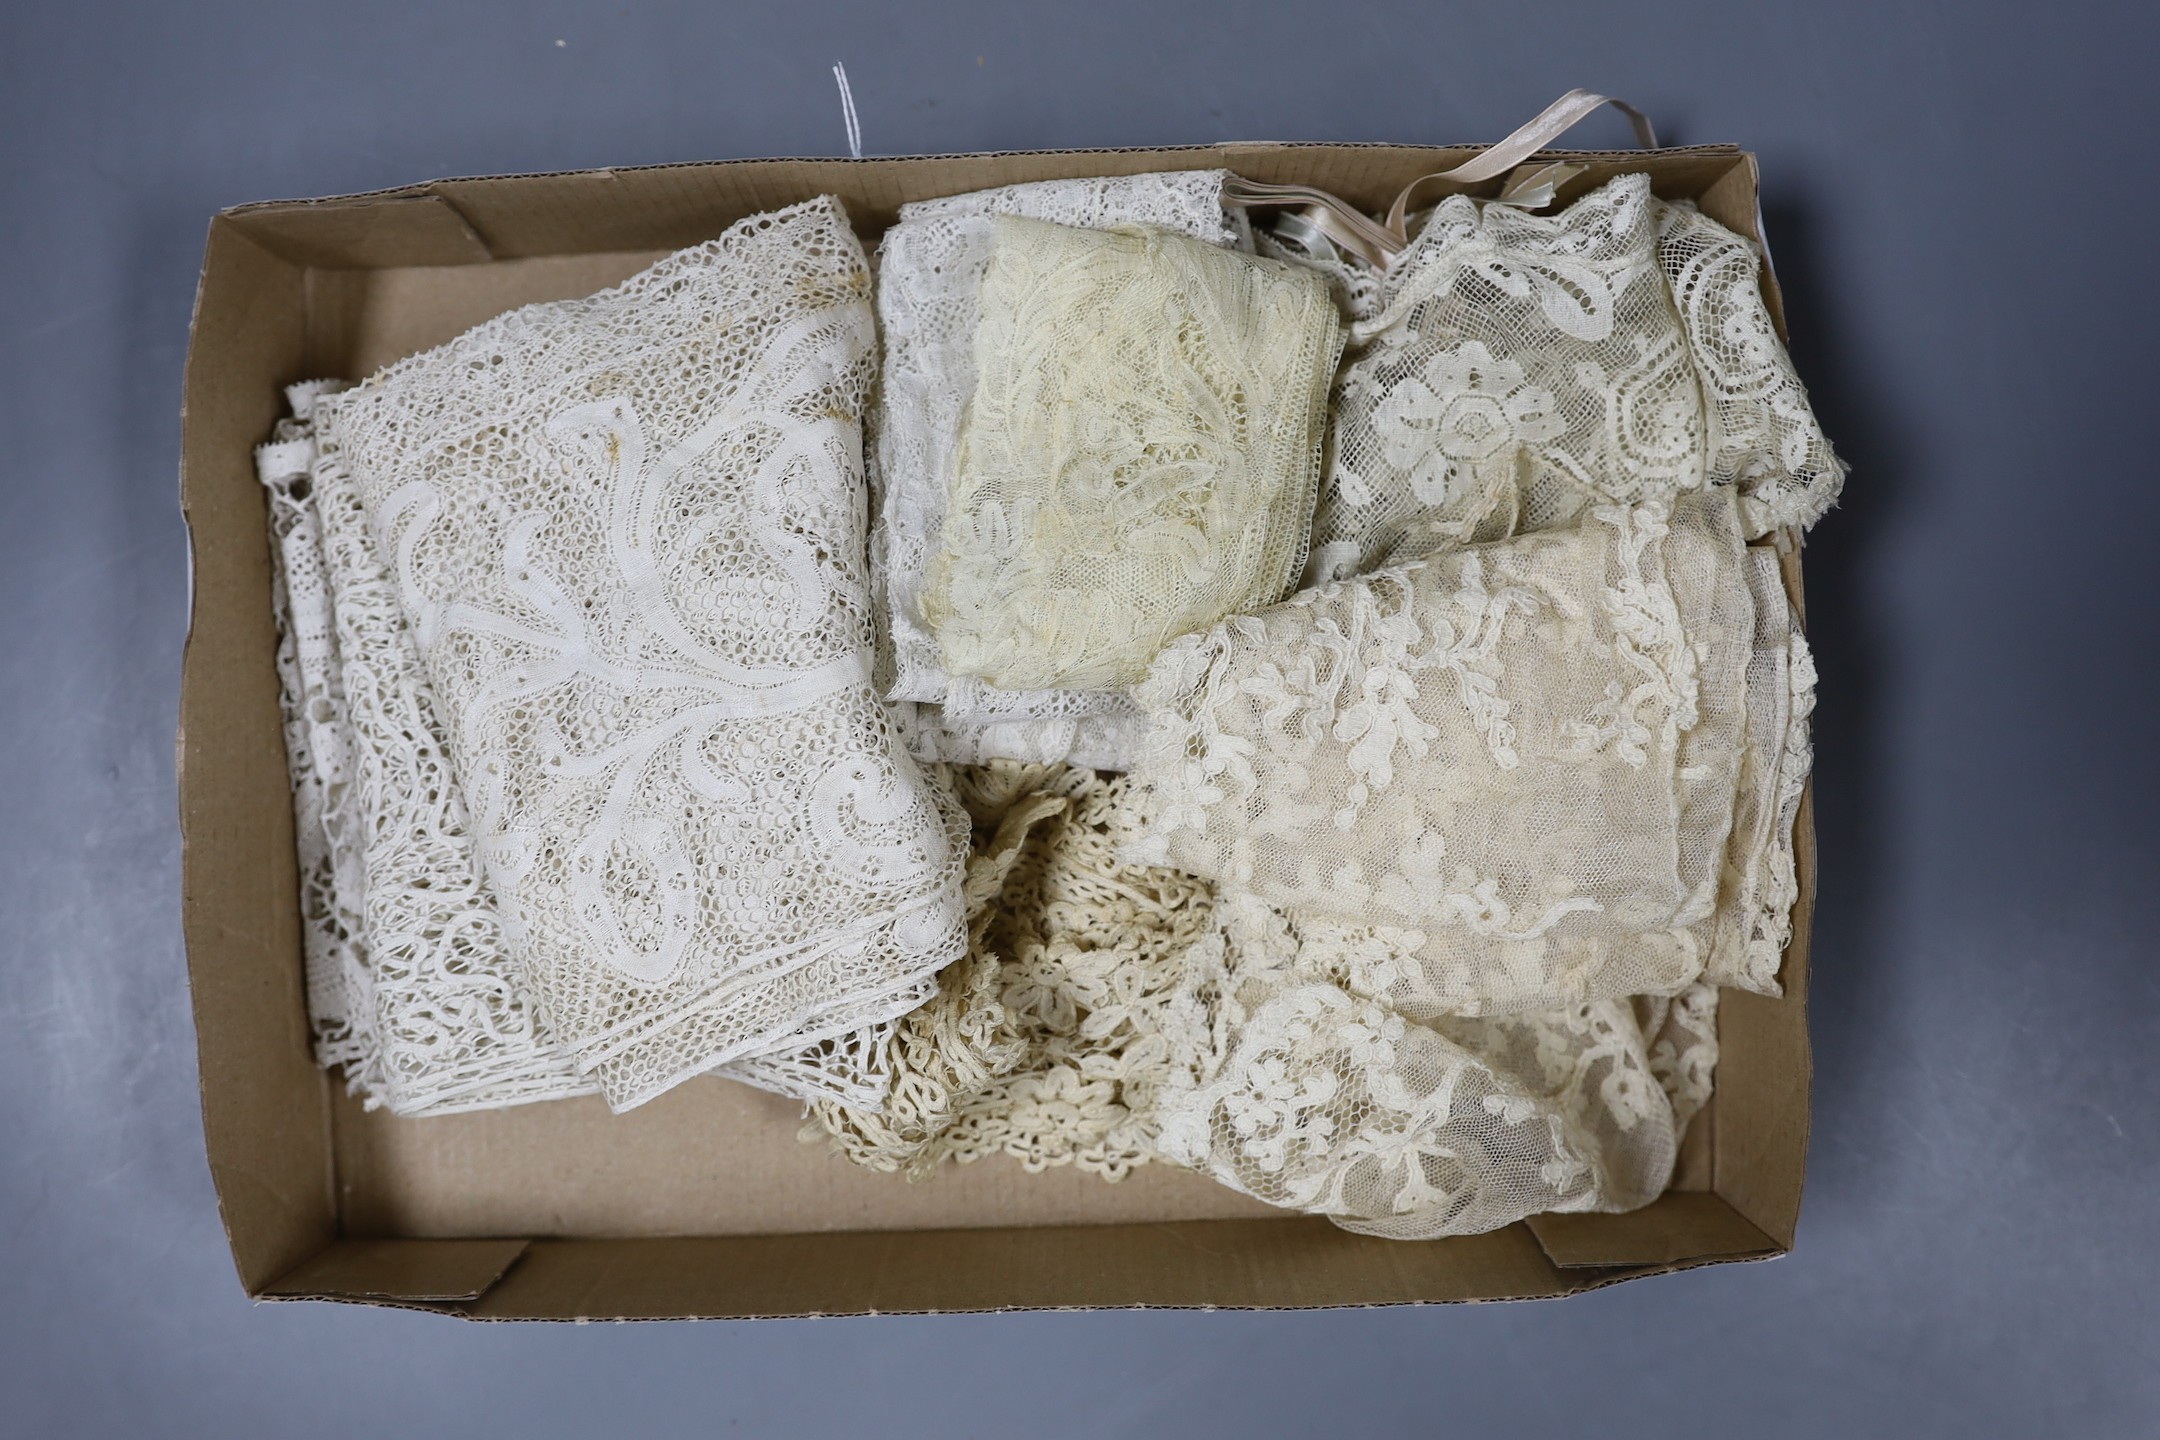 A small collection of 18th century Flemish and bobbin lace trimming, together with late 18th and 19th century bobbin lace trims